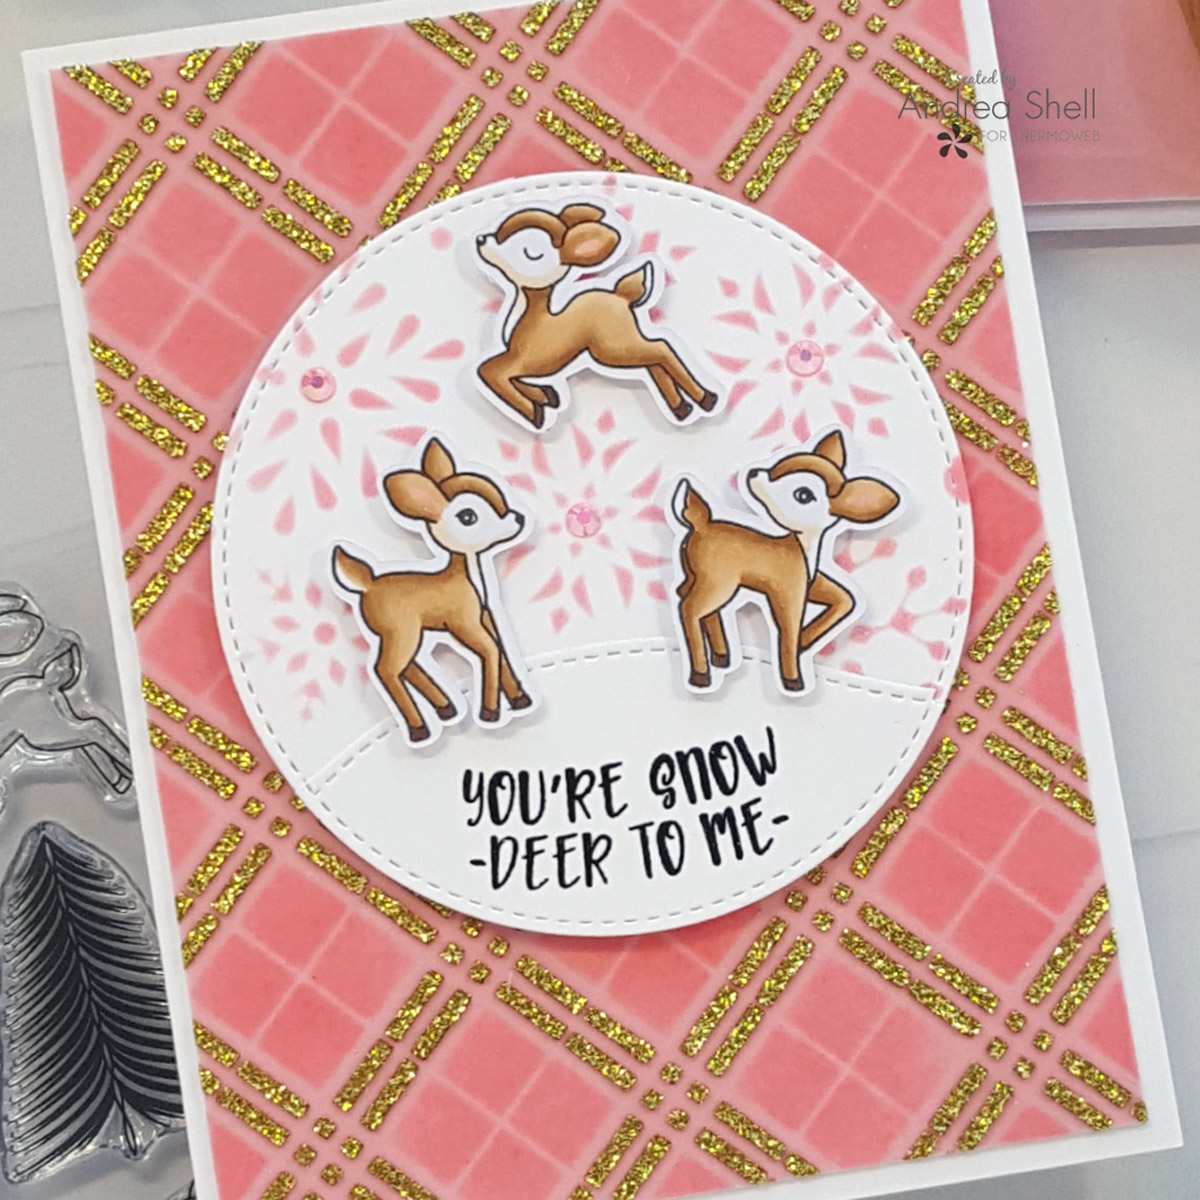 Snow Deer card by Andrea Shell | Snow Deer to Me stamp by LDRS Creative